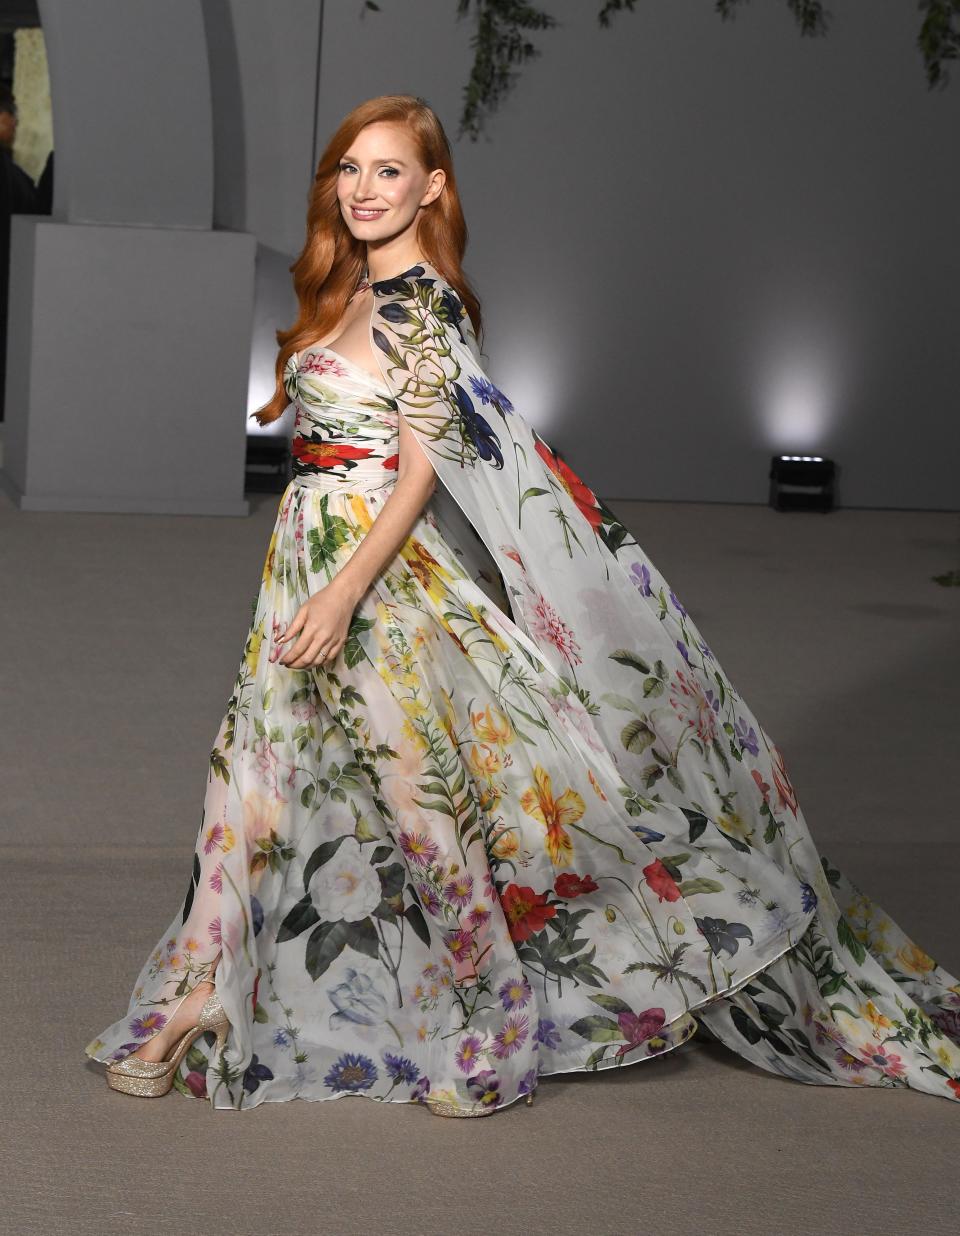 Jessica Chastain attends the Academy Museum Gala in LA on October 15, 2022.